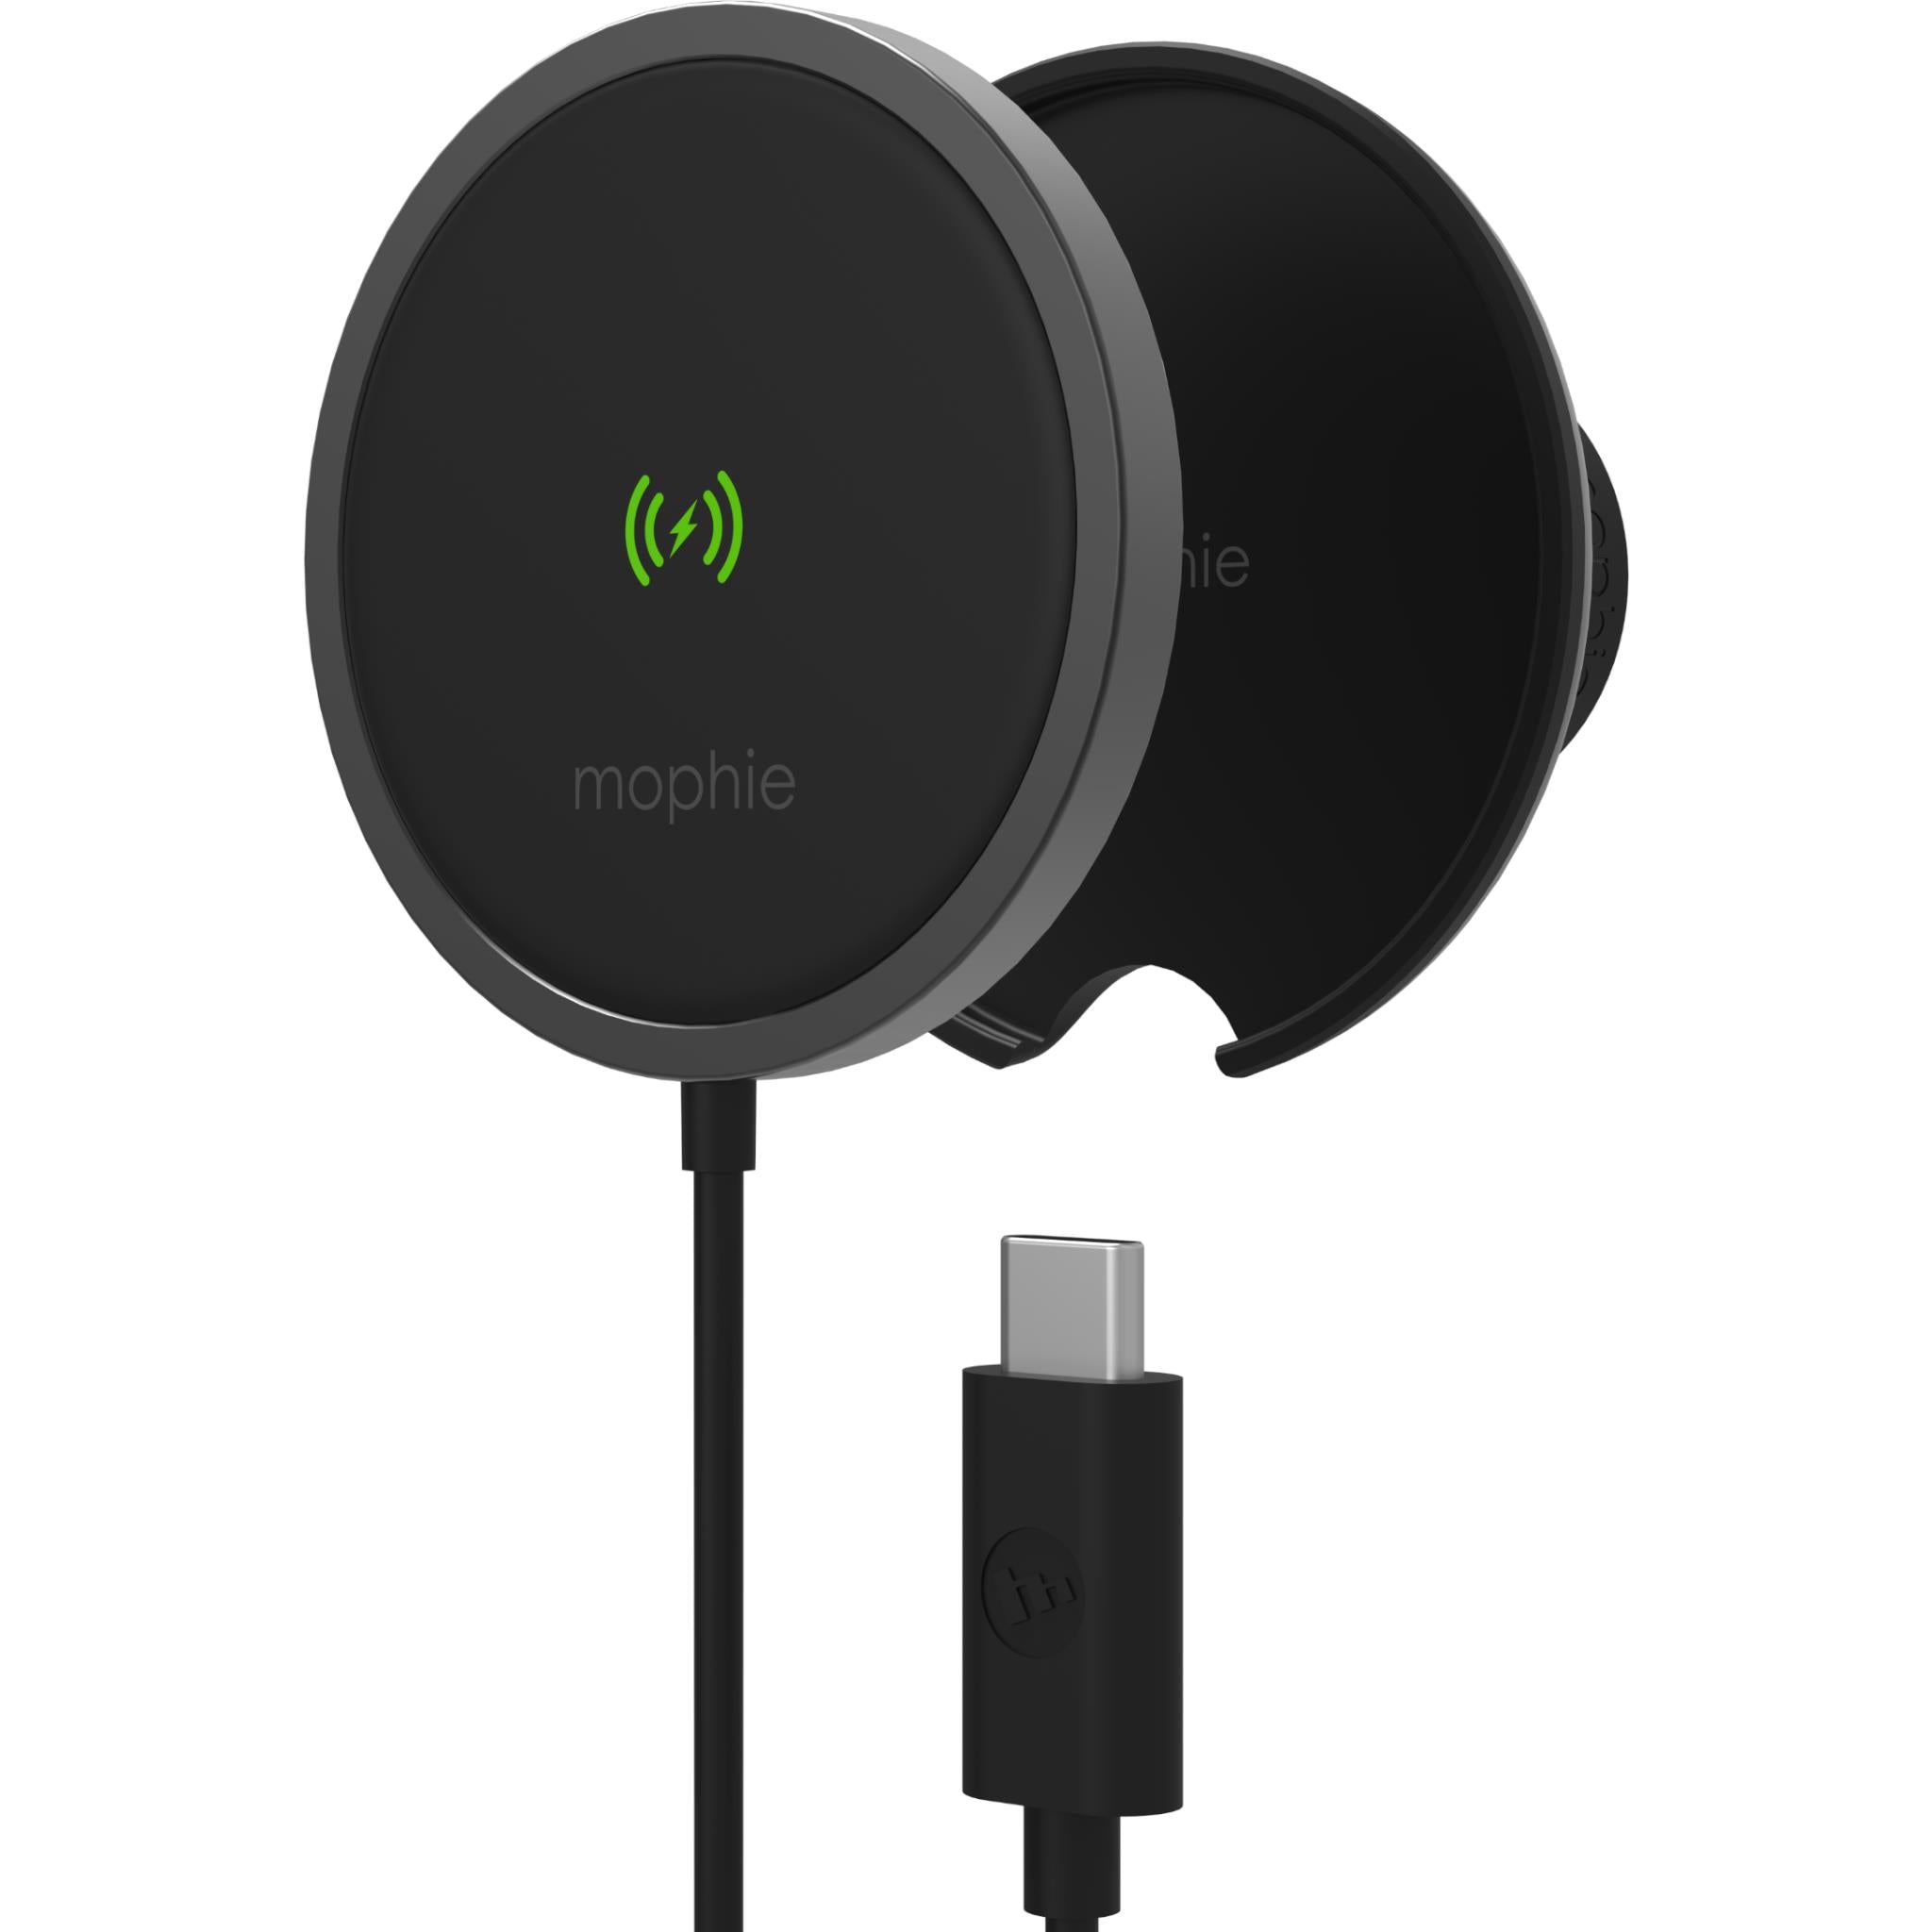 mophie unv snap+ wireless vent mount for iphone (black)